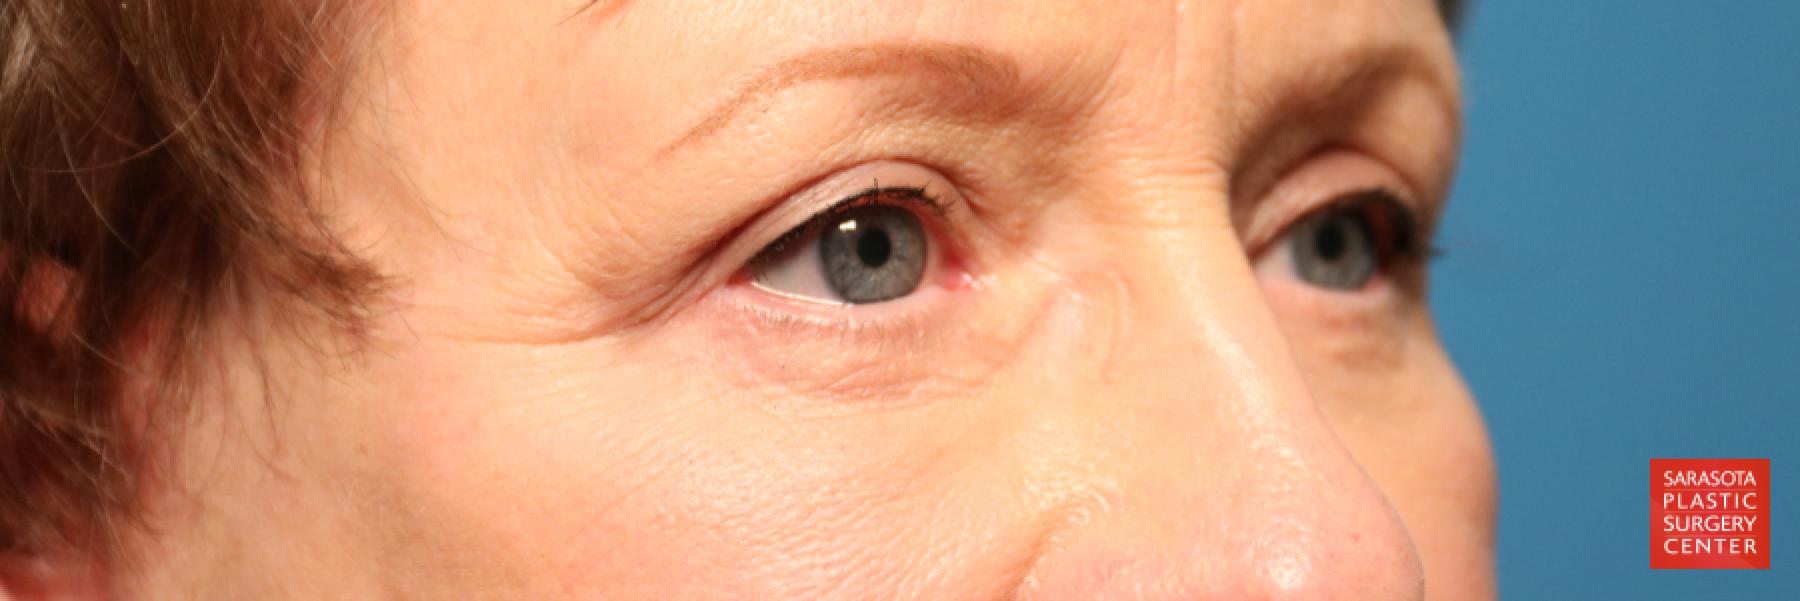 Eyelid Lift: Patient 20 - After 4